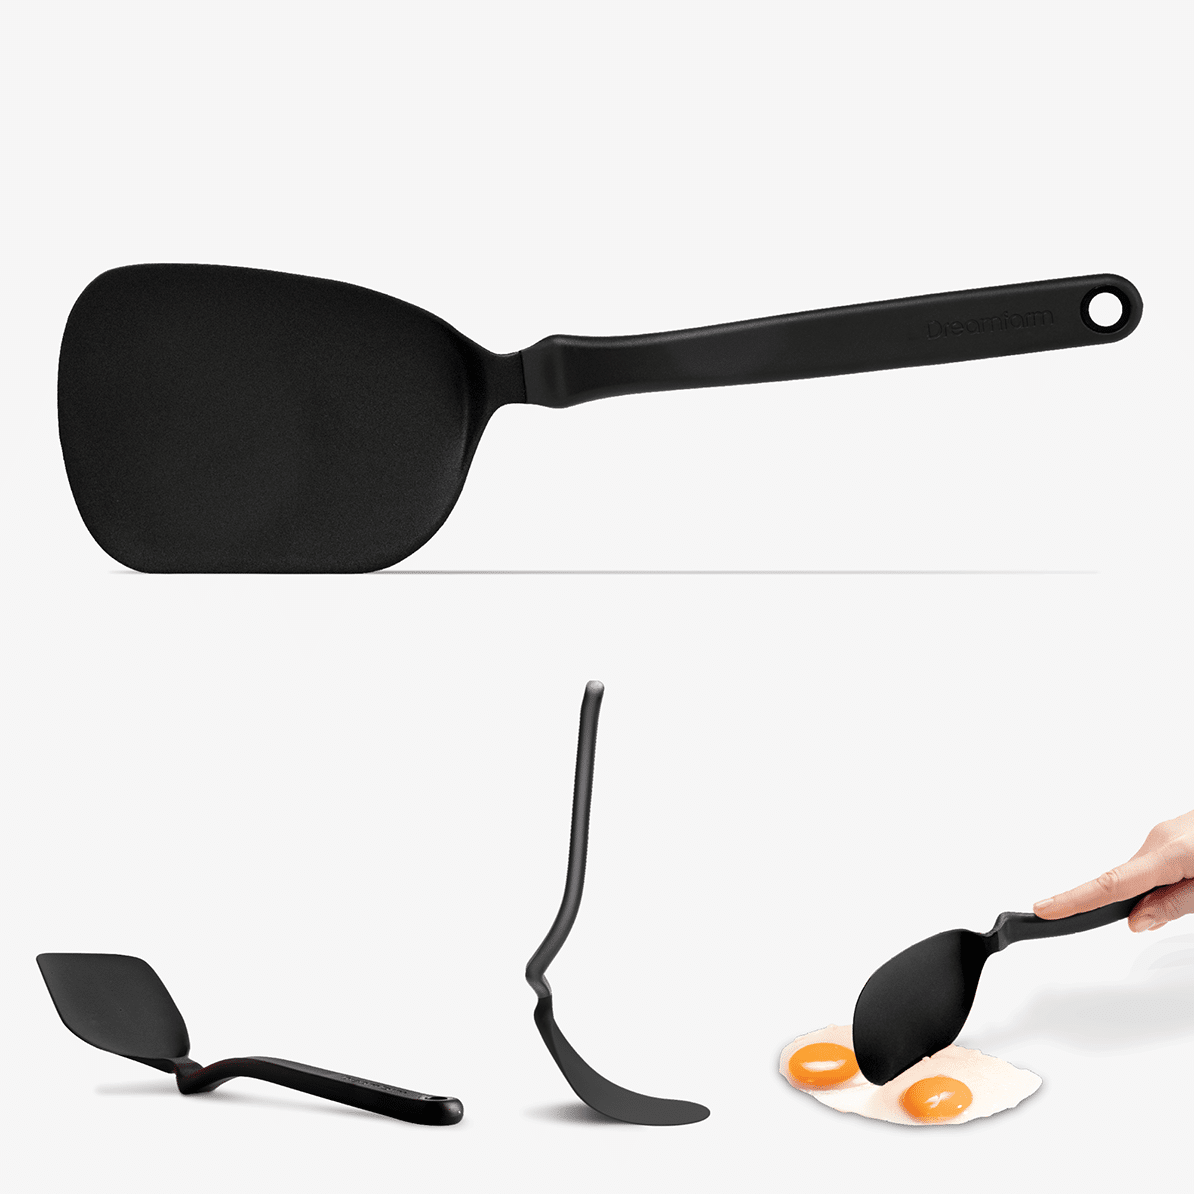 The Chopula is an award-winning spatula that is not only thin and flexible for flipping from the front, but also incredibly strong for chopping on its side. Great for separating minced meat or eggs in a pan, flipping pancakes and serving. Chopula’s clever handle design also lifts its head up off your kitchen bench when you put it down, leaving you a mess-free countertop!&nbsp;